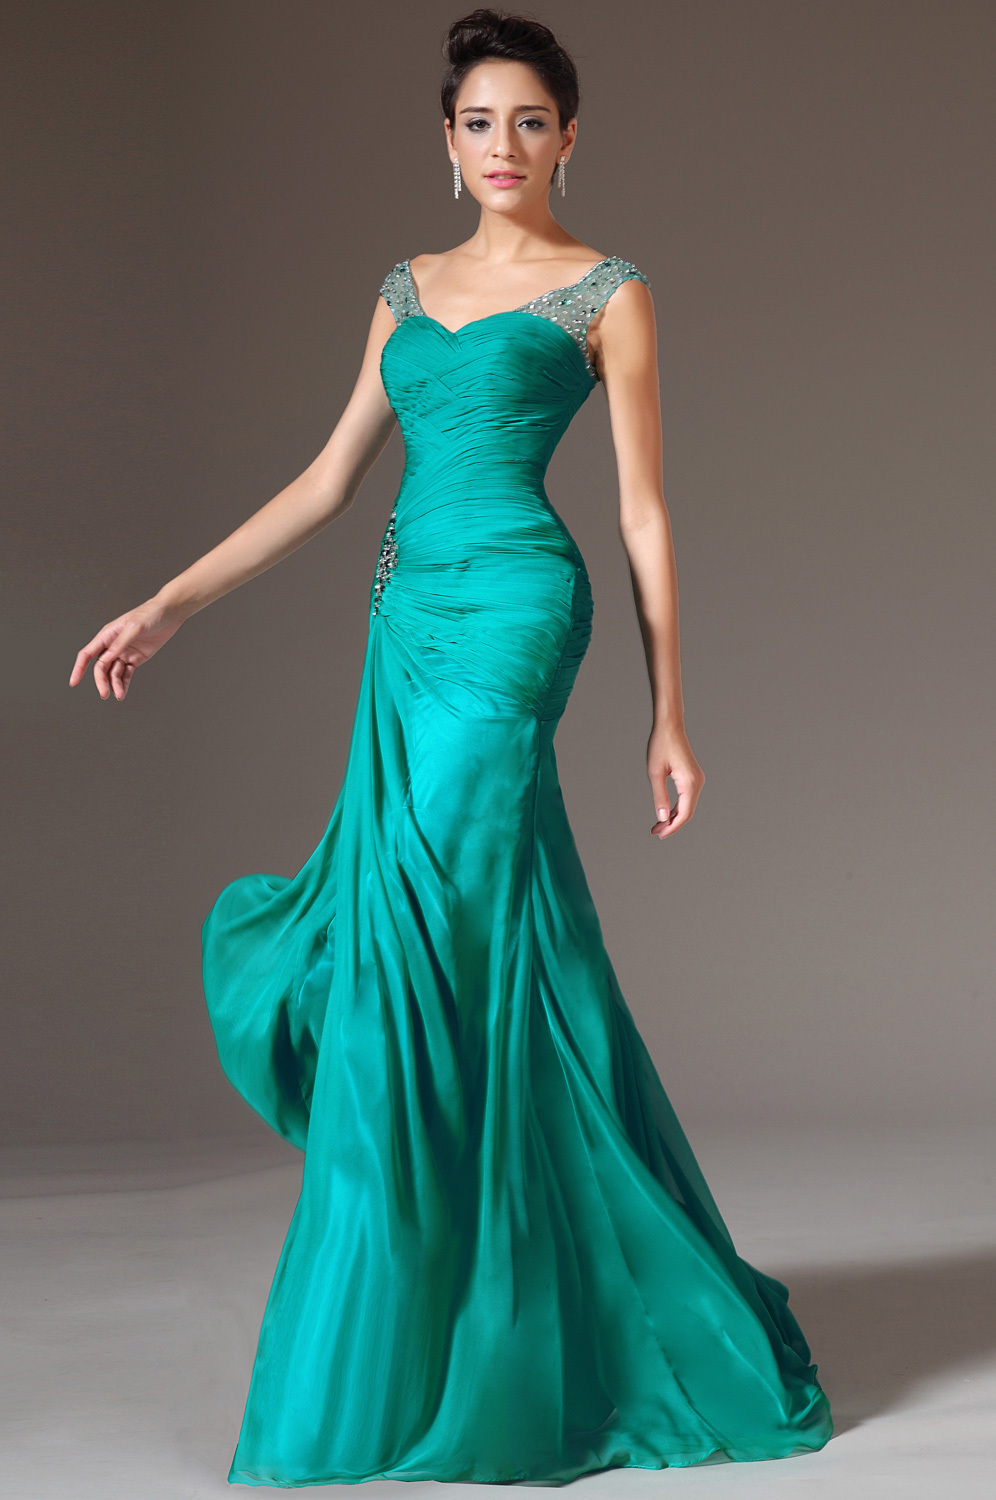 elegant gowns for sale